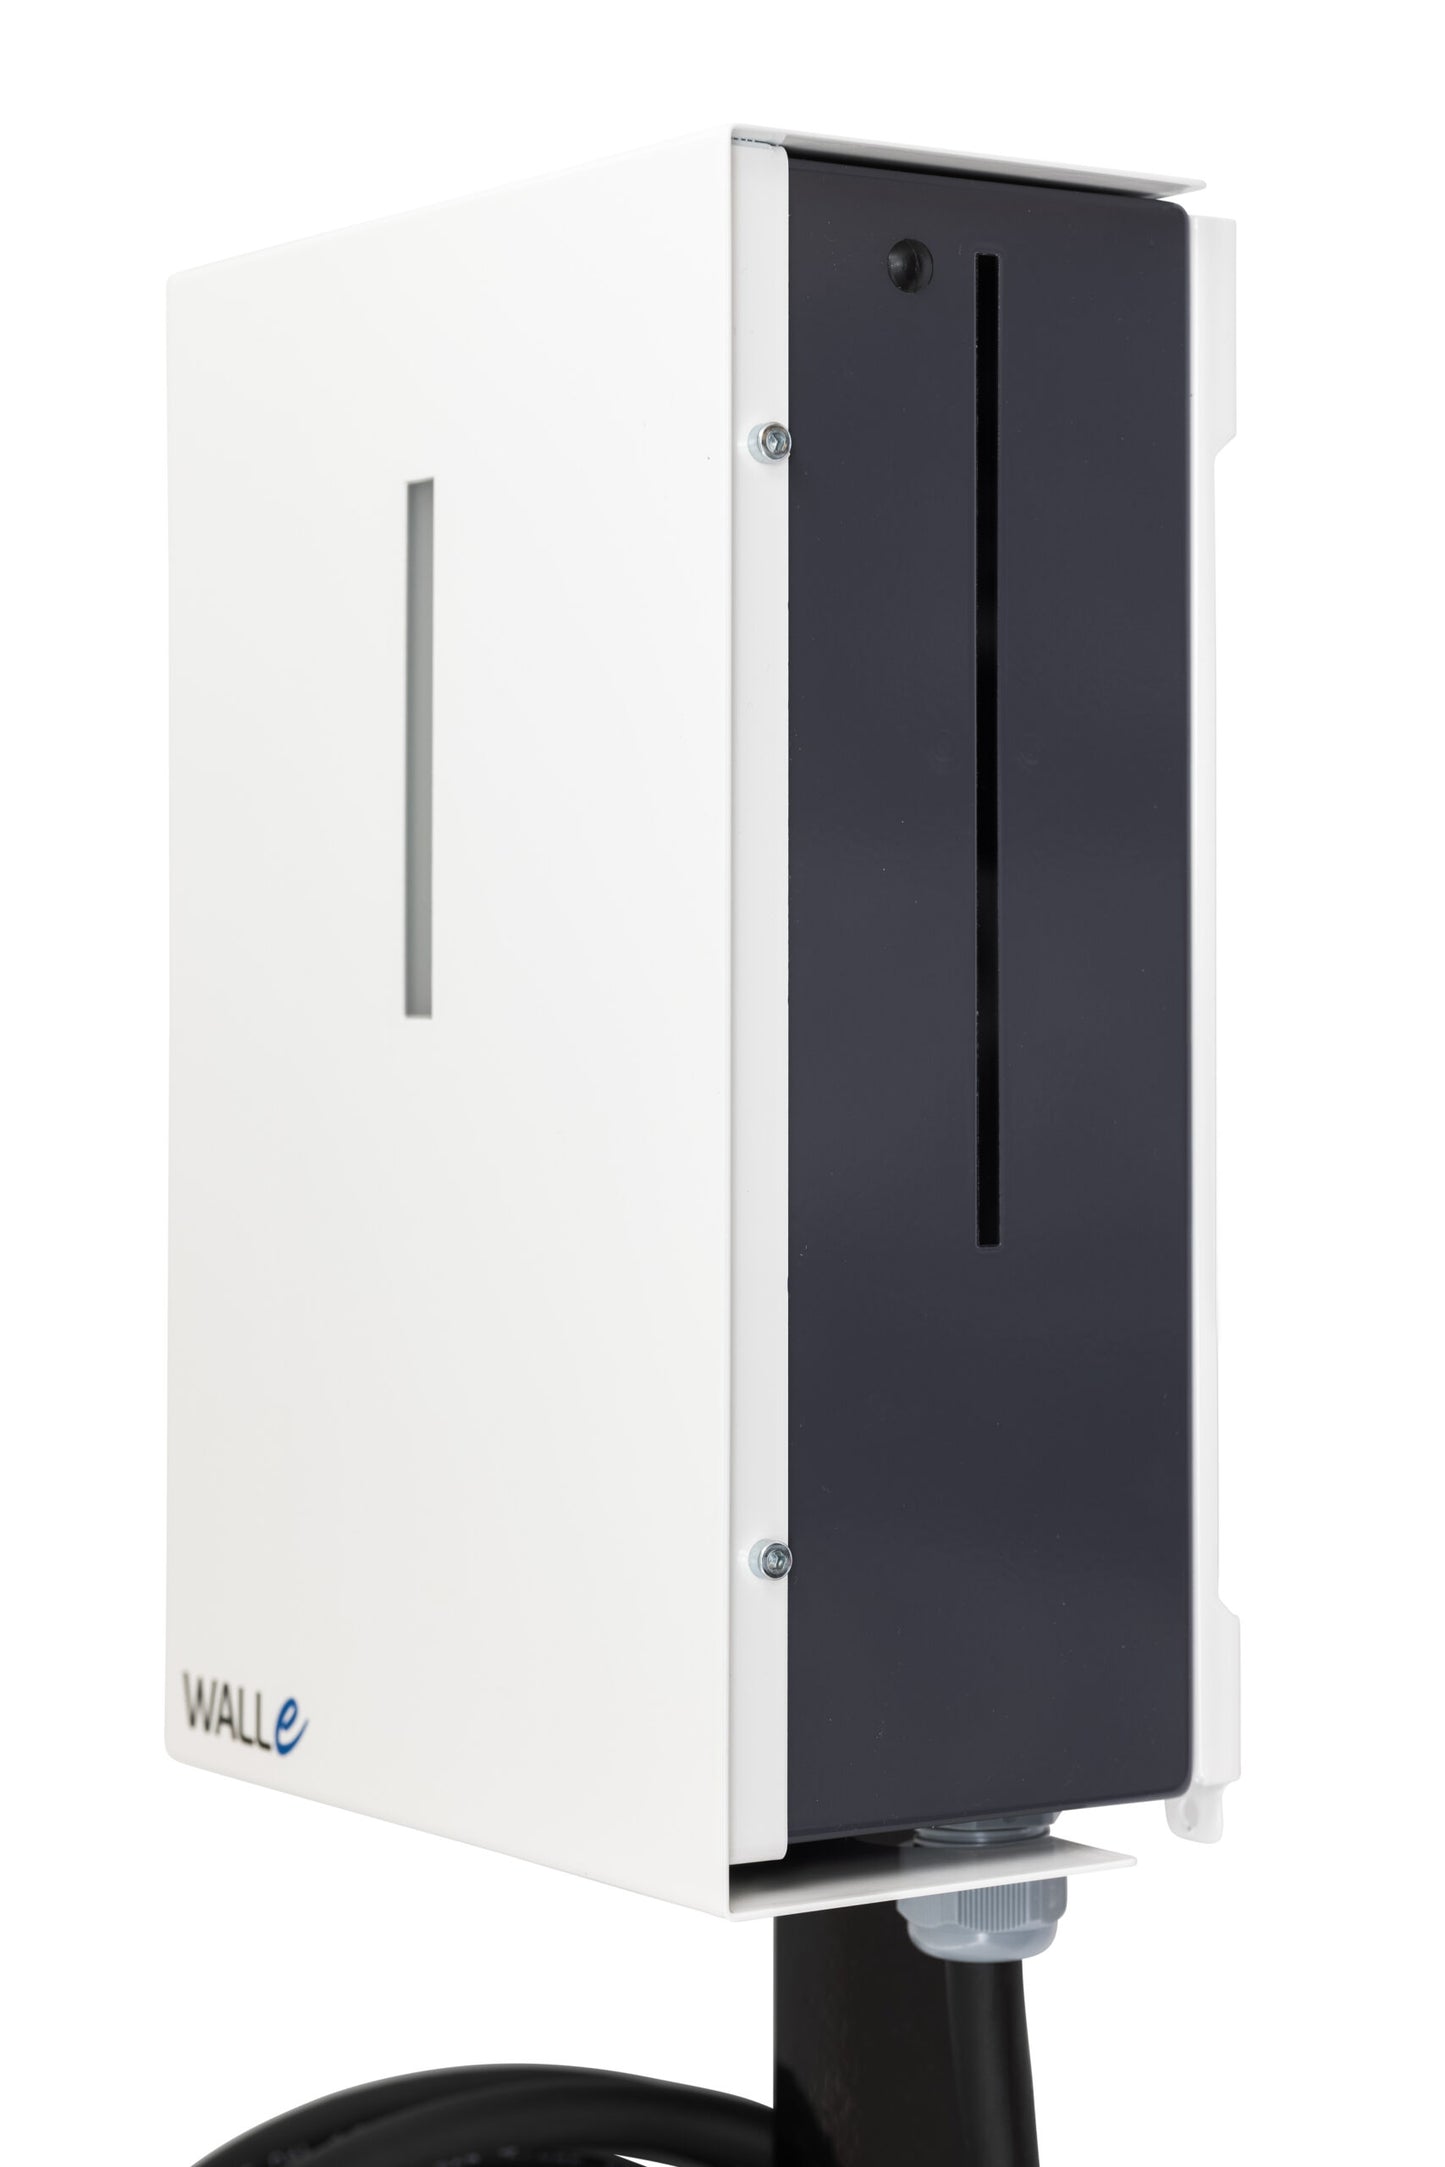 Walle 16M domestic 11kw charging station with load management and energy meter option